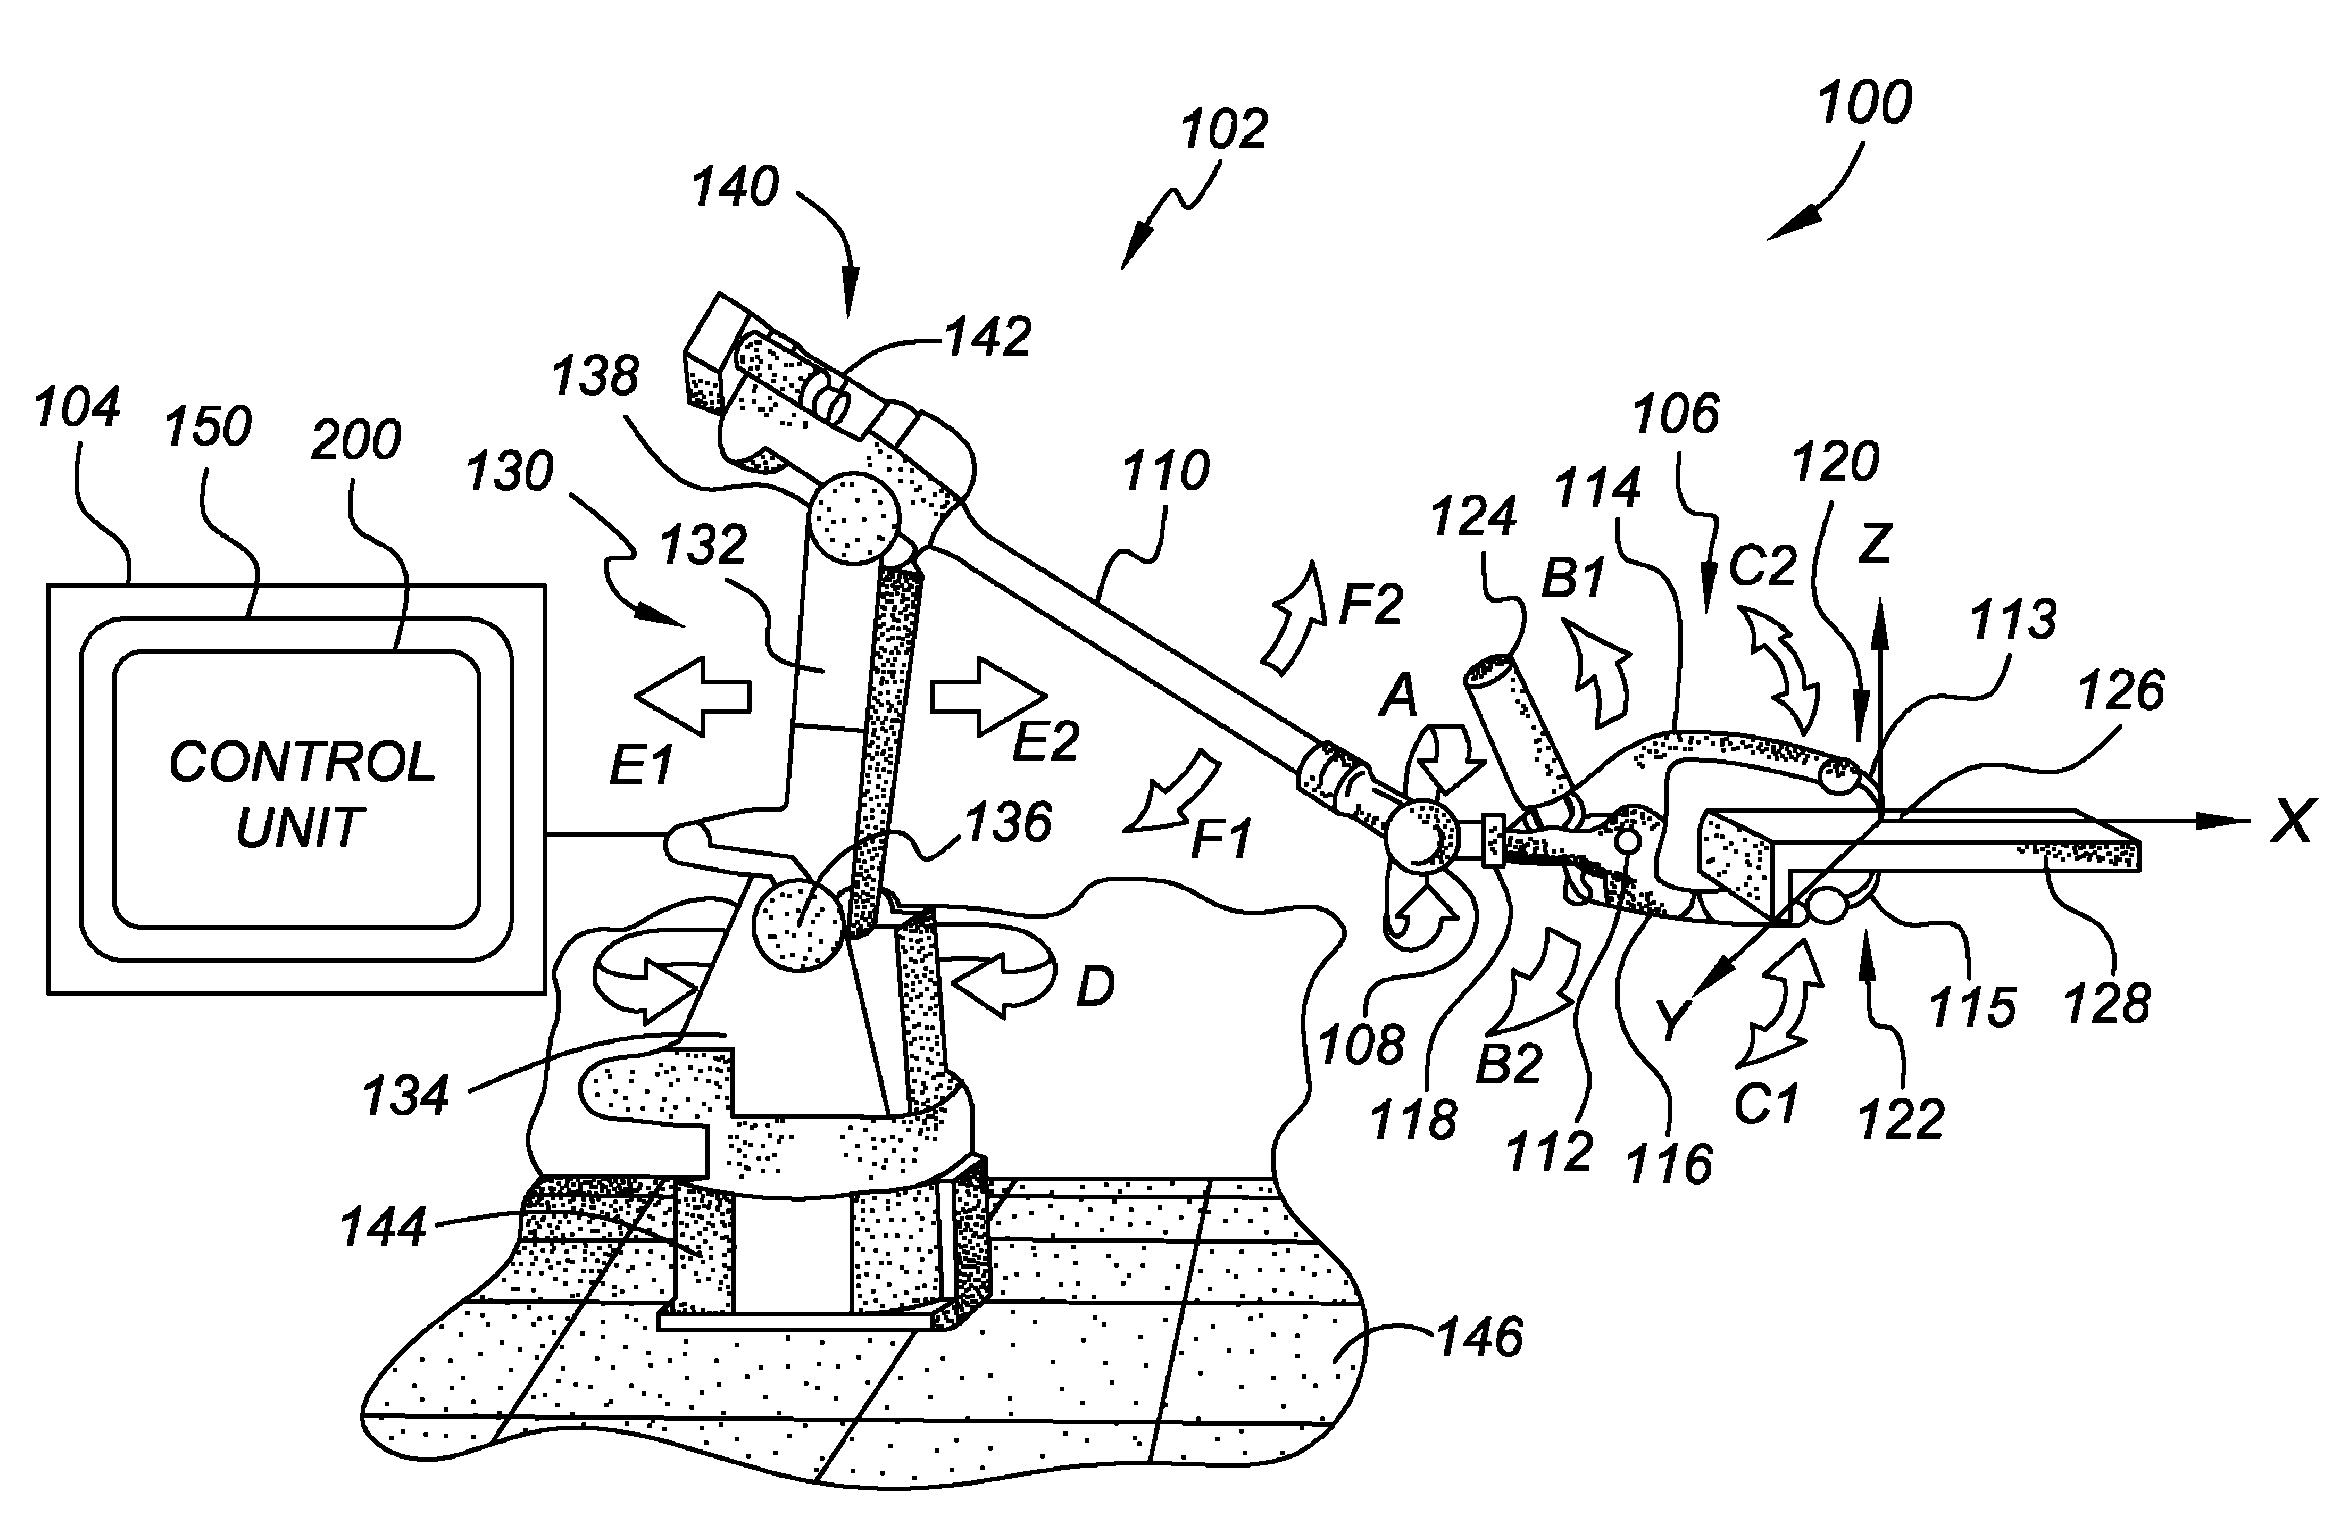 Apparatus and method of automated manufacturing